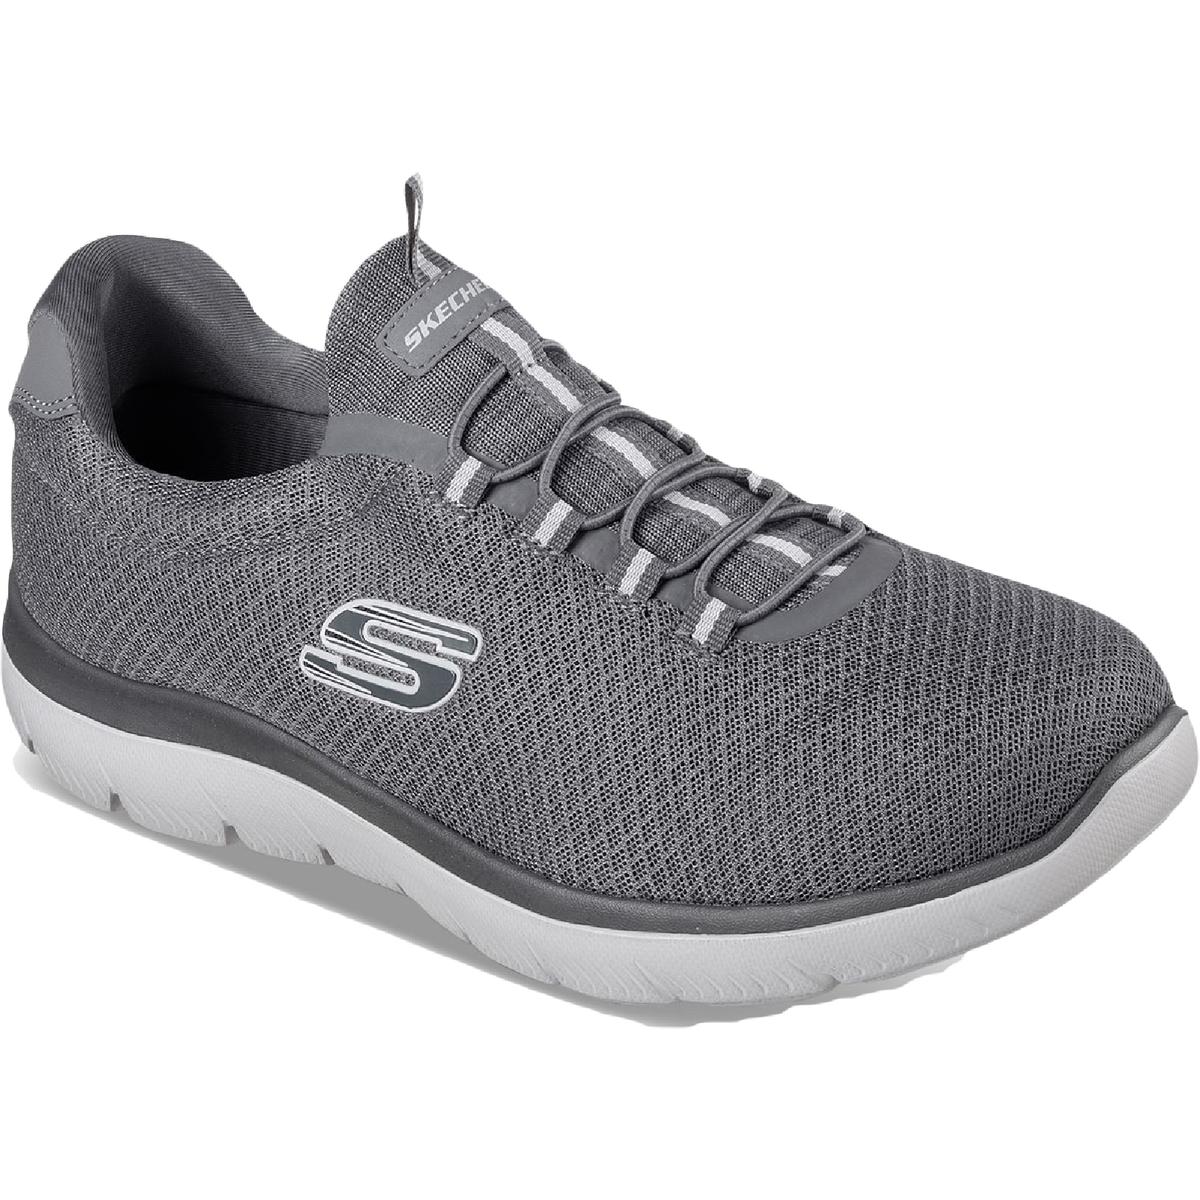 Skechers Summits Mens Fitness Walking Athletic Shoes